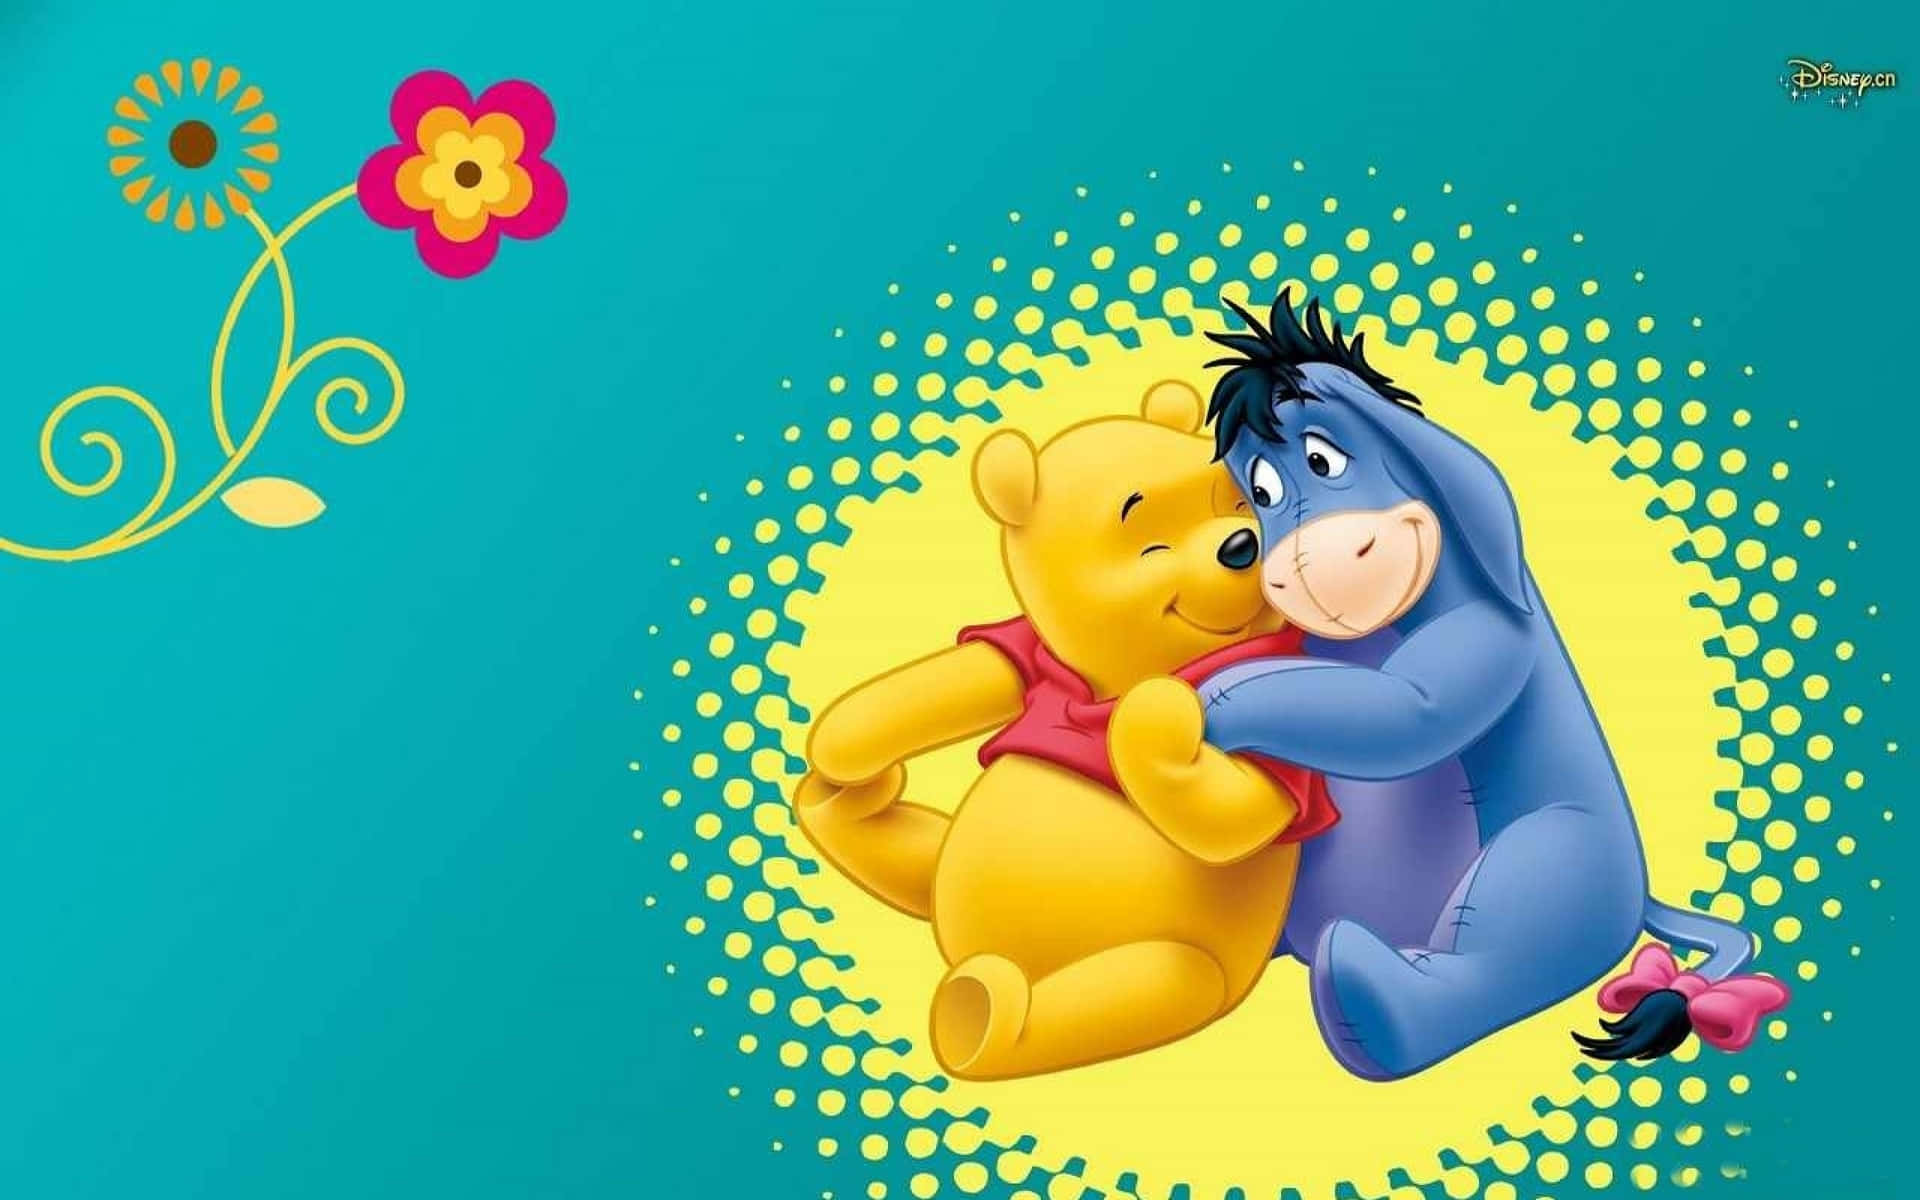 Enjoy the magical world of Winnie The Pooh on your desktop Wallpaper